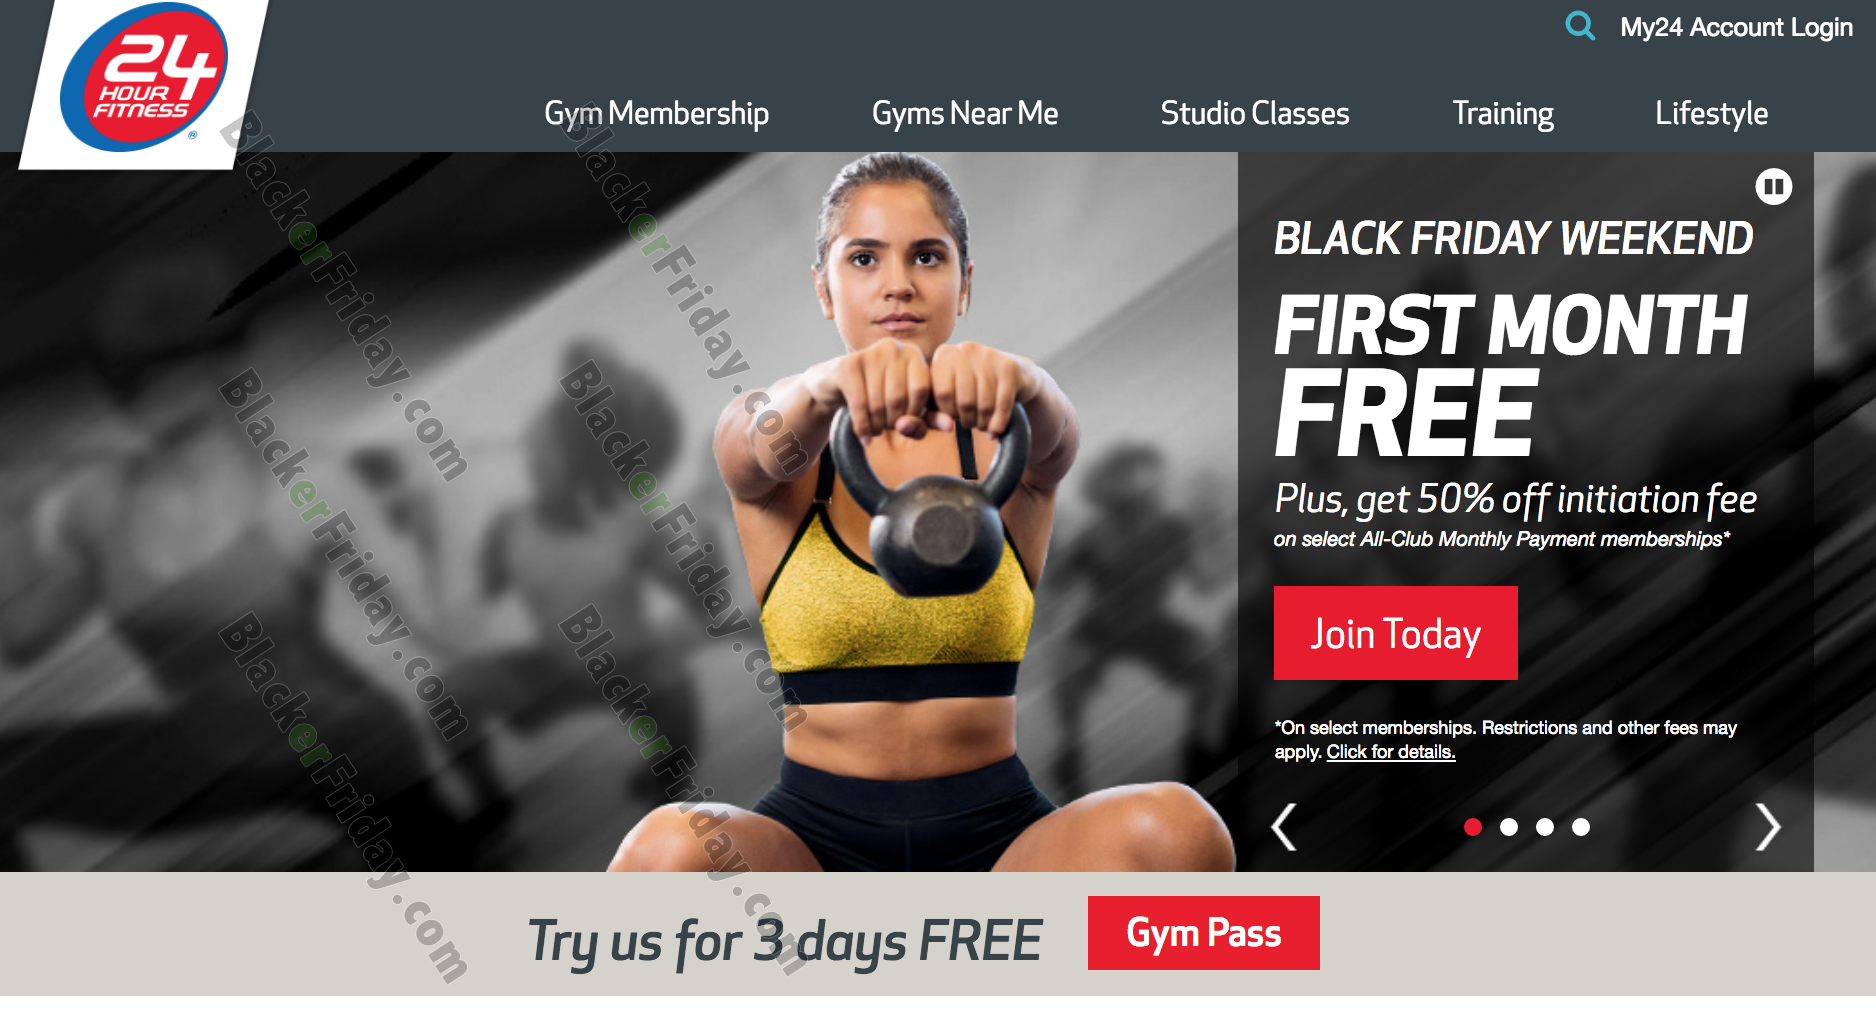 15 Minute Can You Cancel 24 Hour Fitness Membership Online Reddit for Women